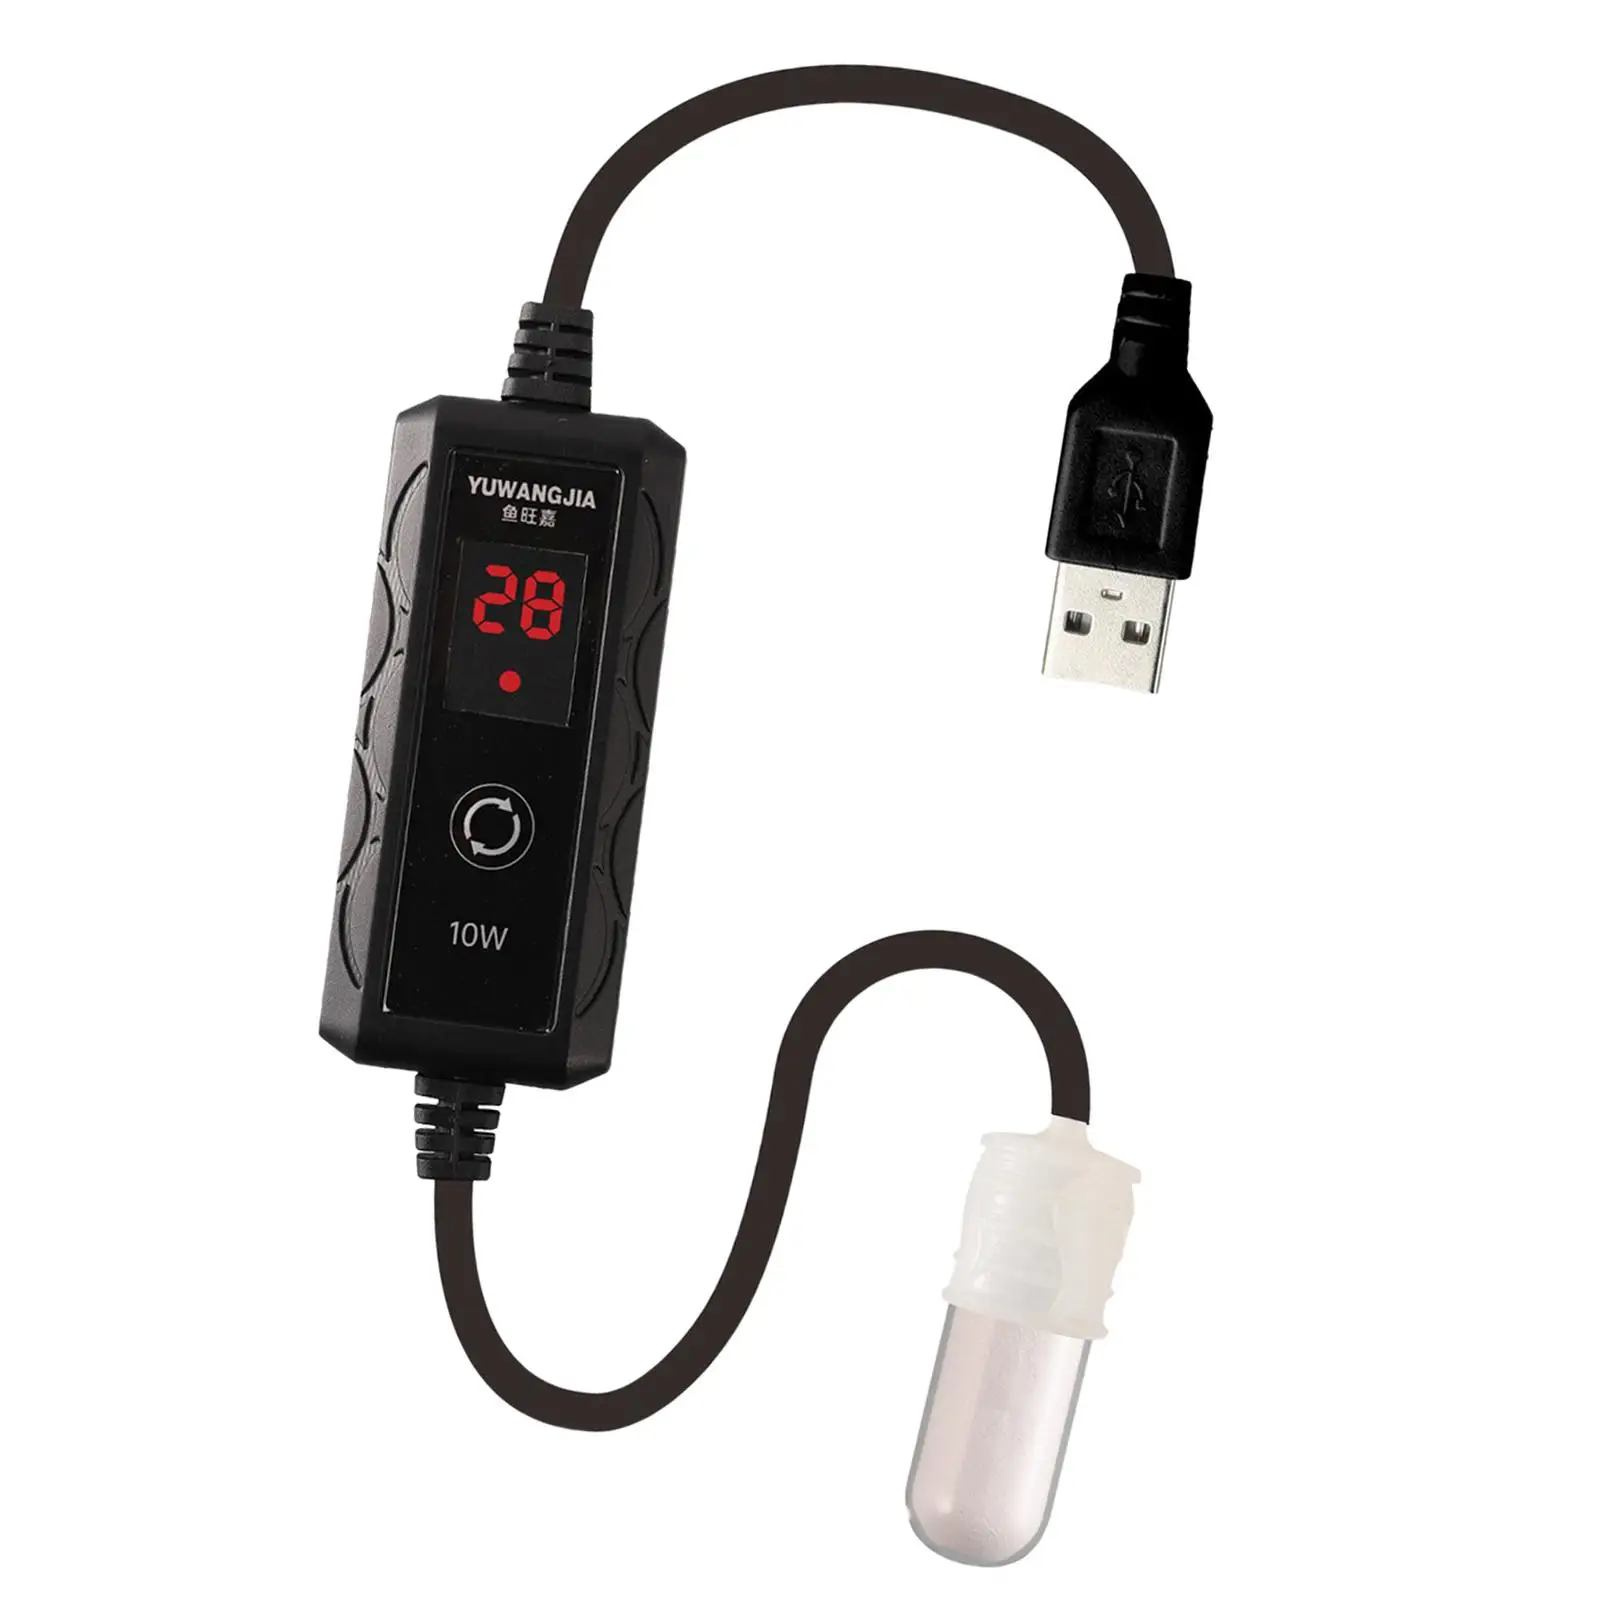 USB Small Fish Tank Heater Constant Temperature for 1 Gallon LED Display